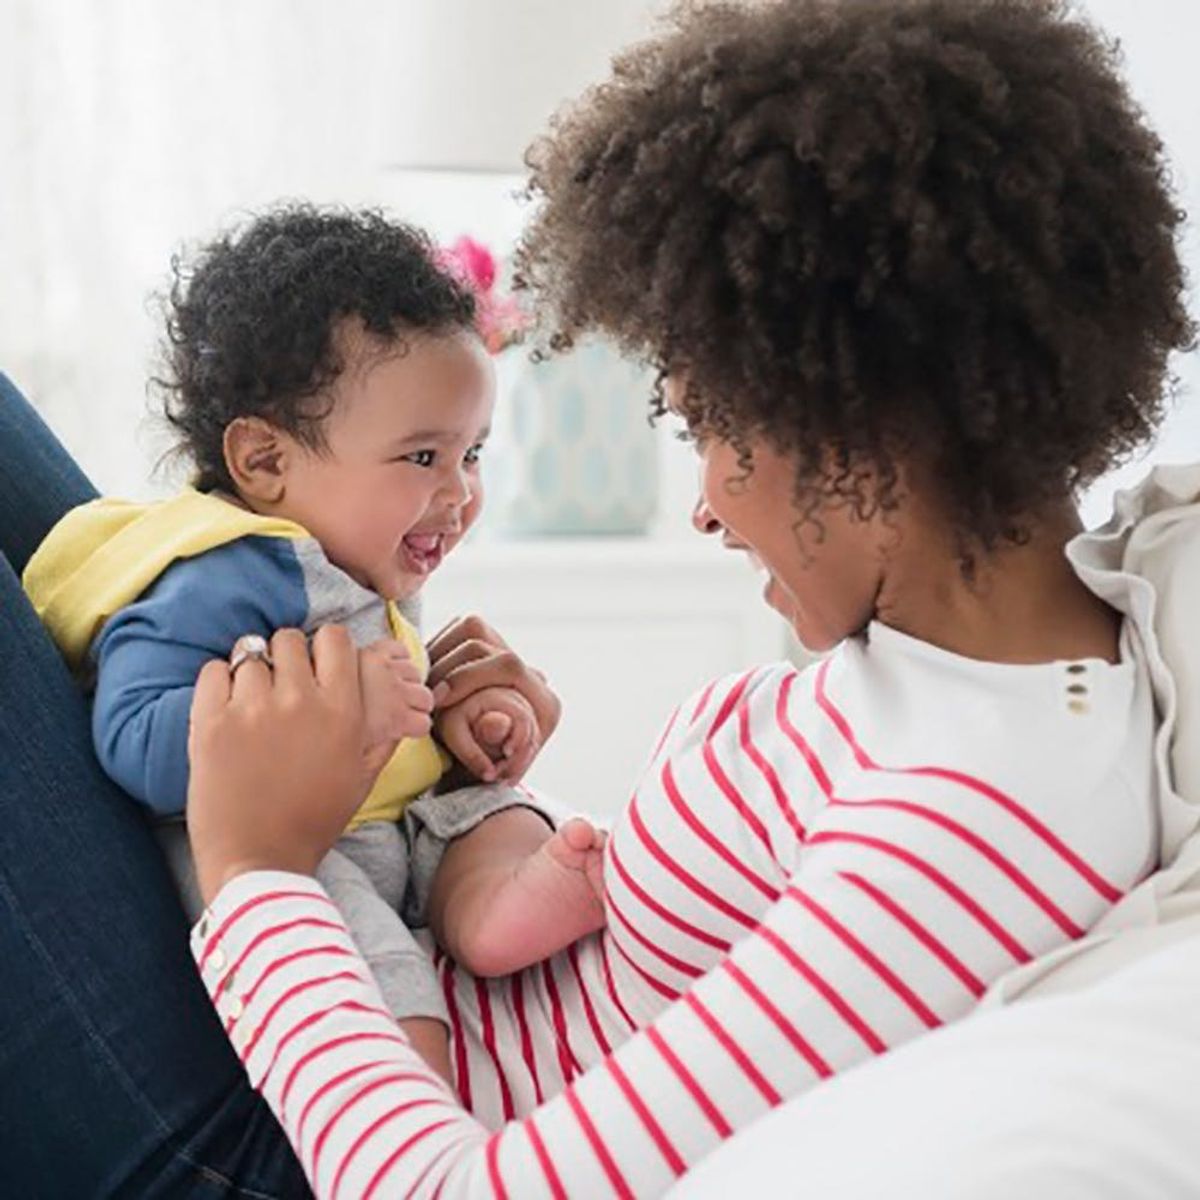 6 Reasons to Stay in and Snuggle Your Baby Today